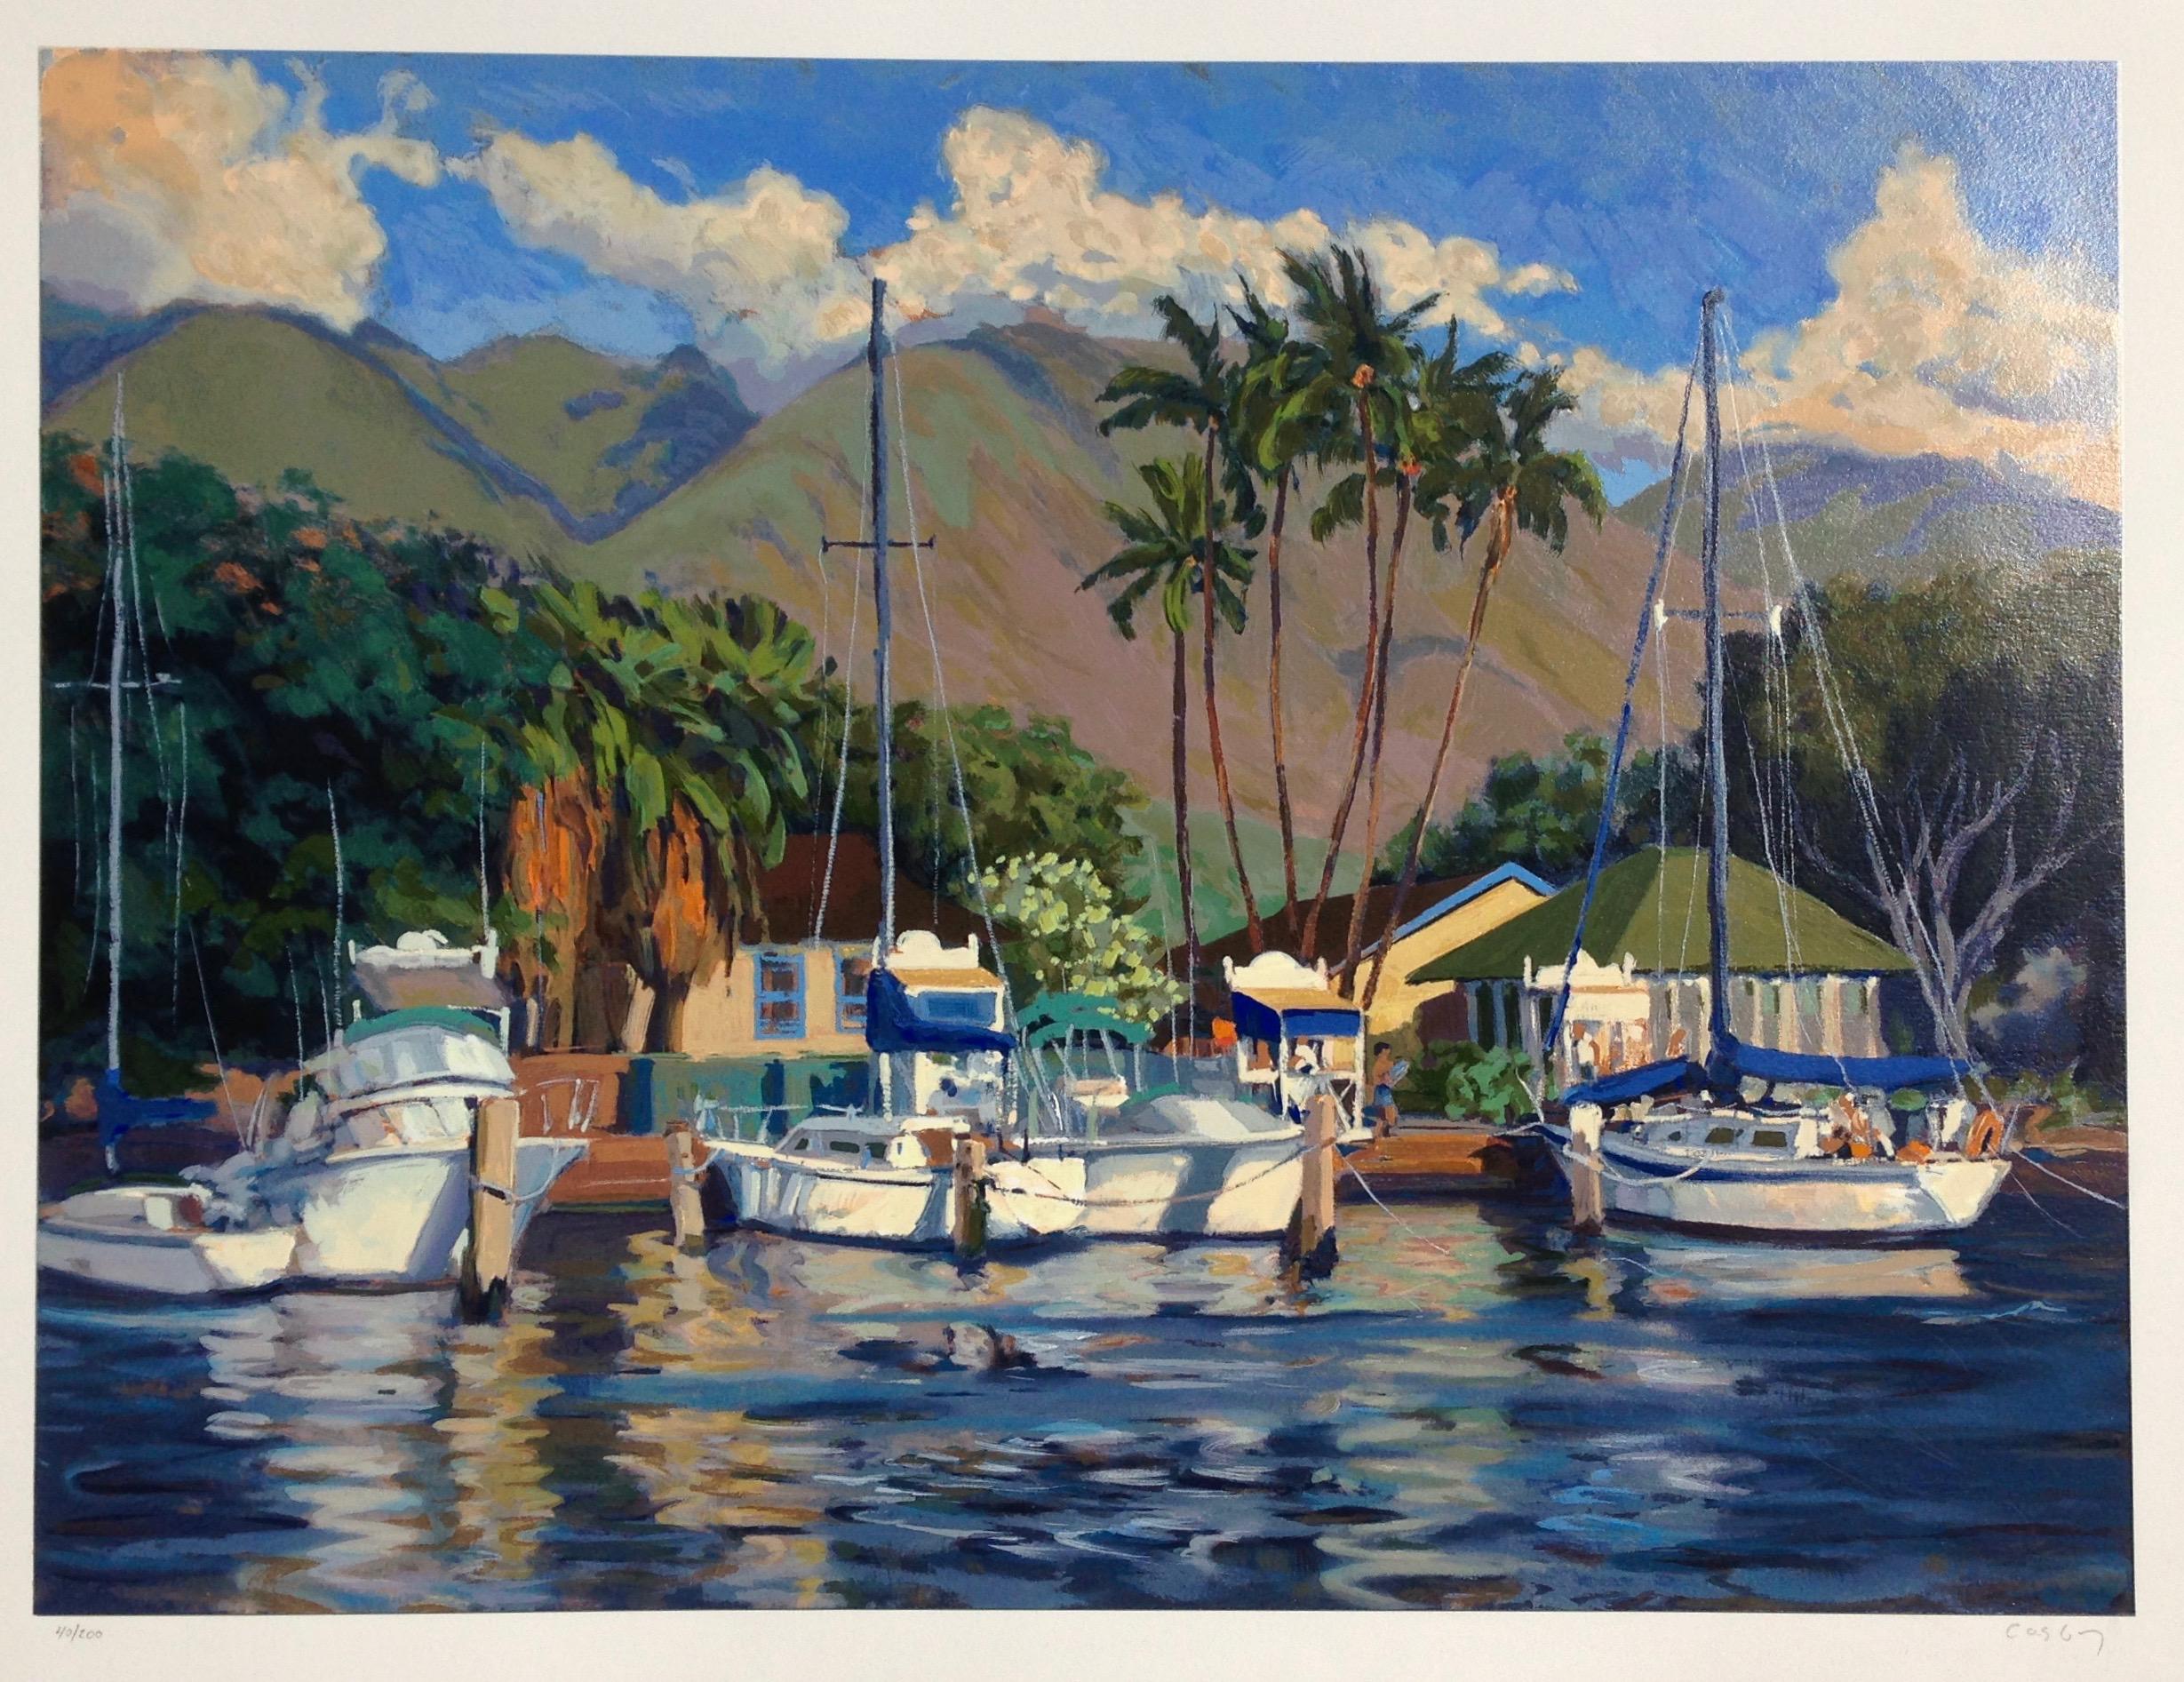 John Cosby Landscape Print - "Afternoon Glow" Colorful Serigraph of Lahaina Harbor 